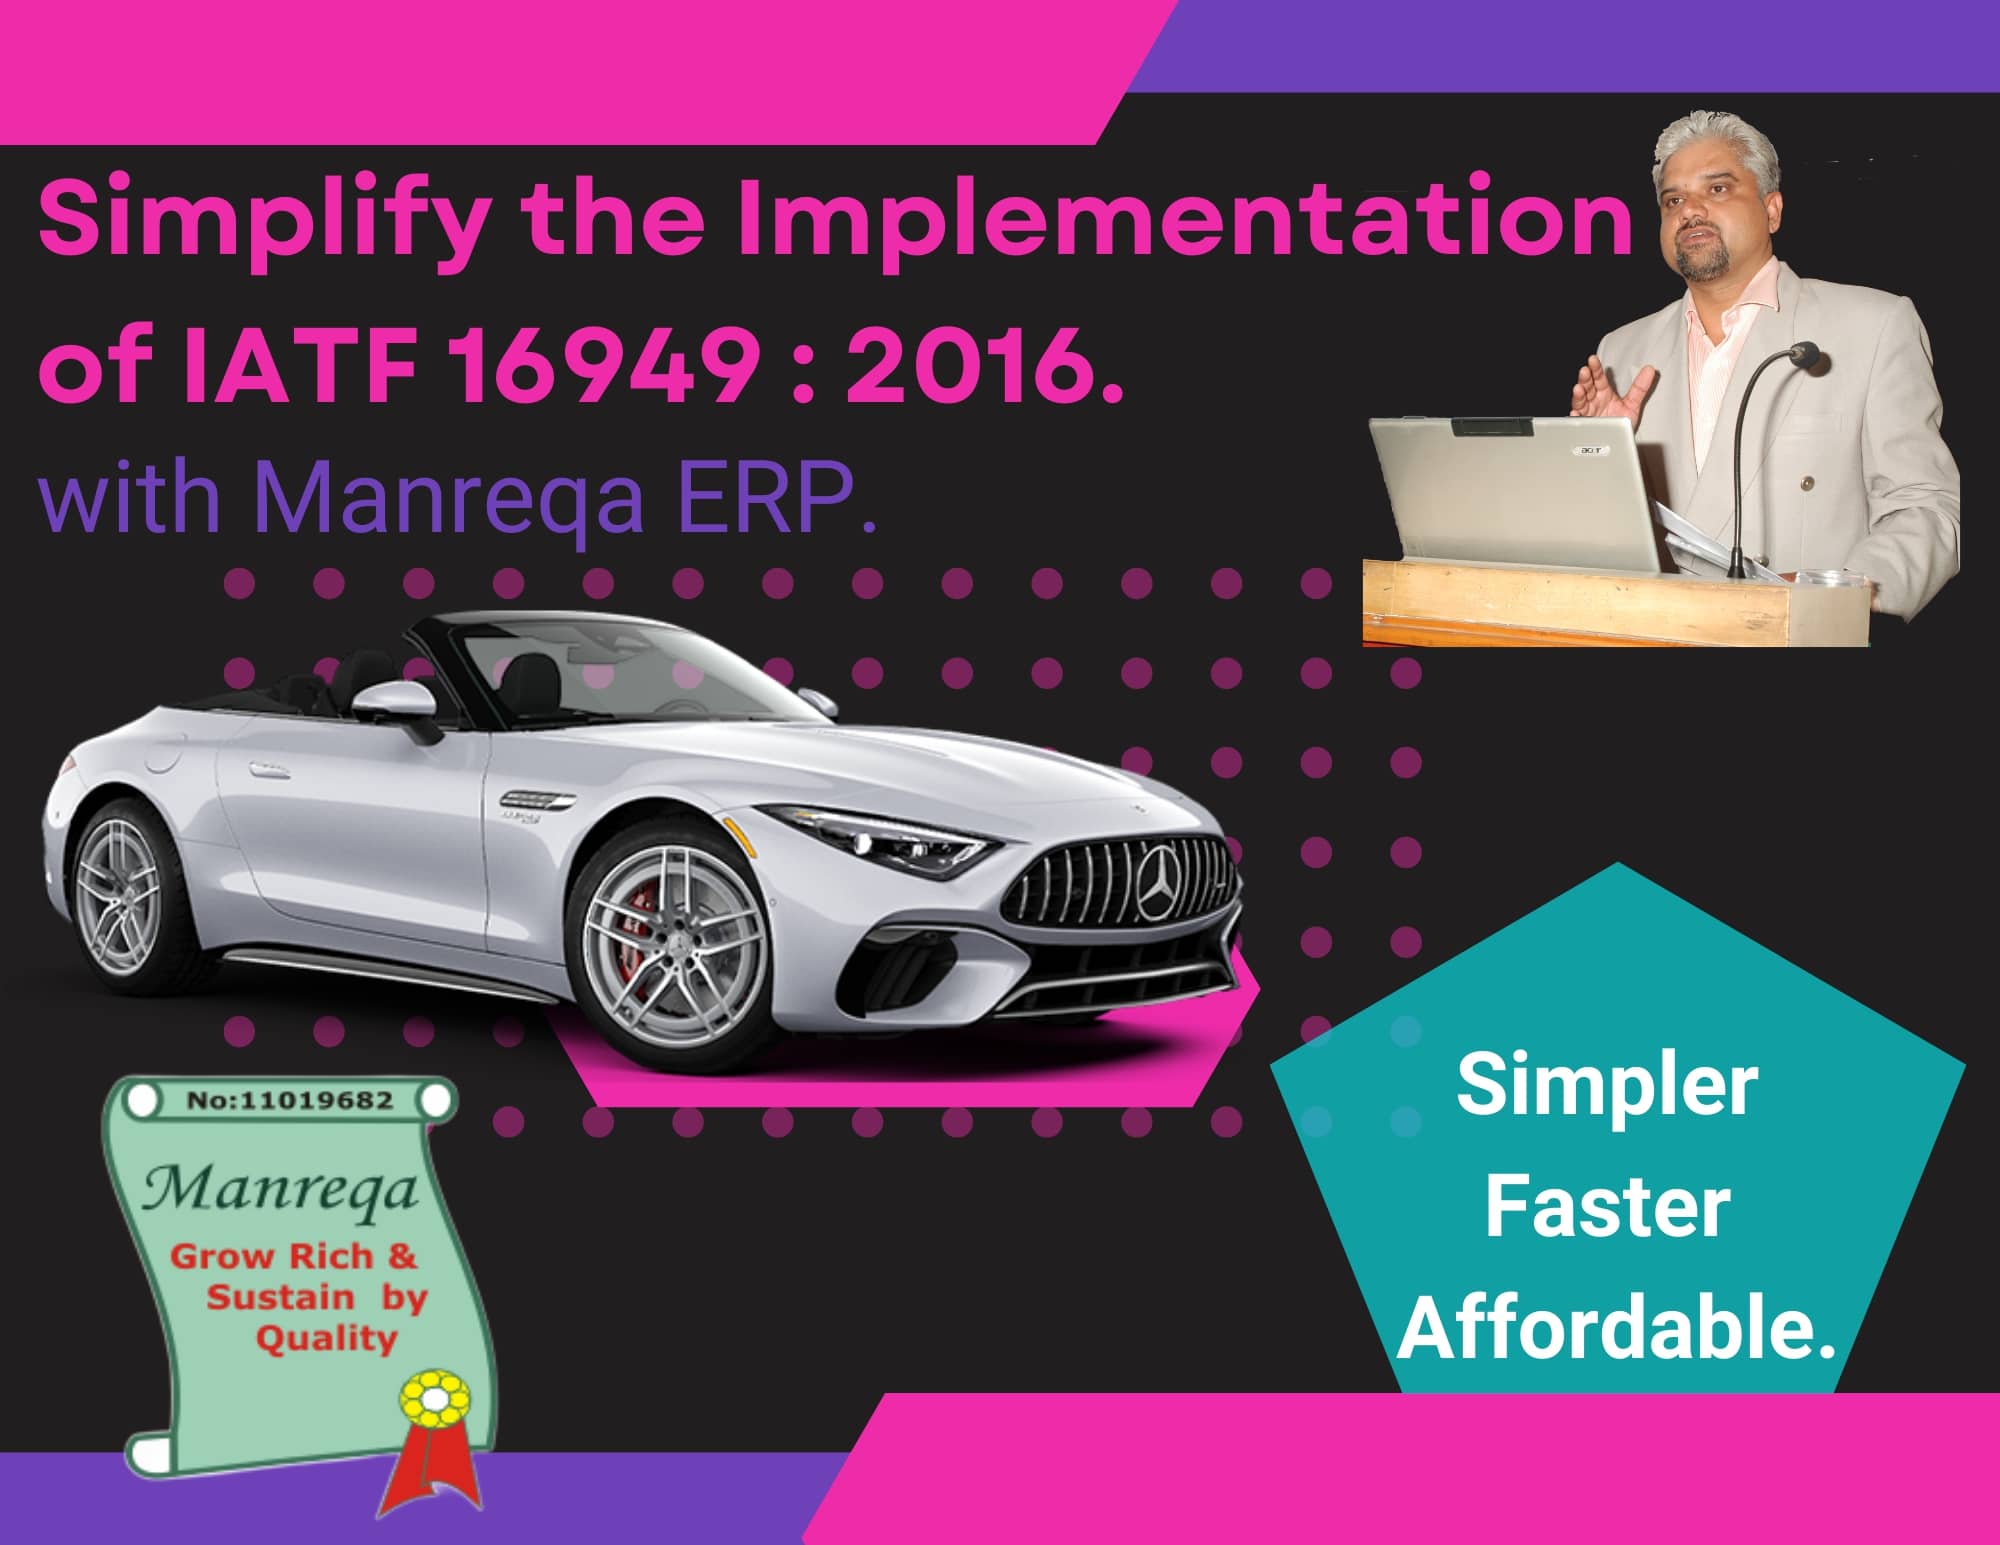 Manreqa ERP. Simpler Faster Affordable. Simplify the Implementation of IATF 16949: 2016. 